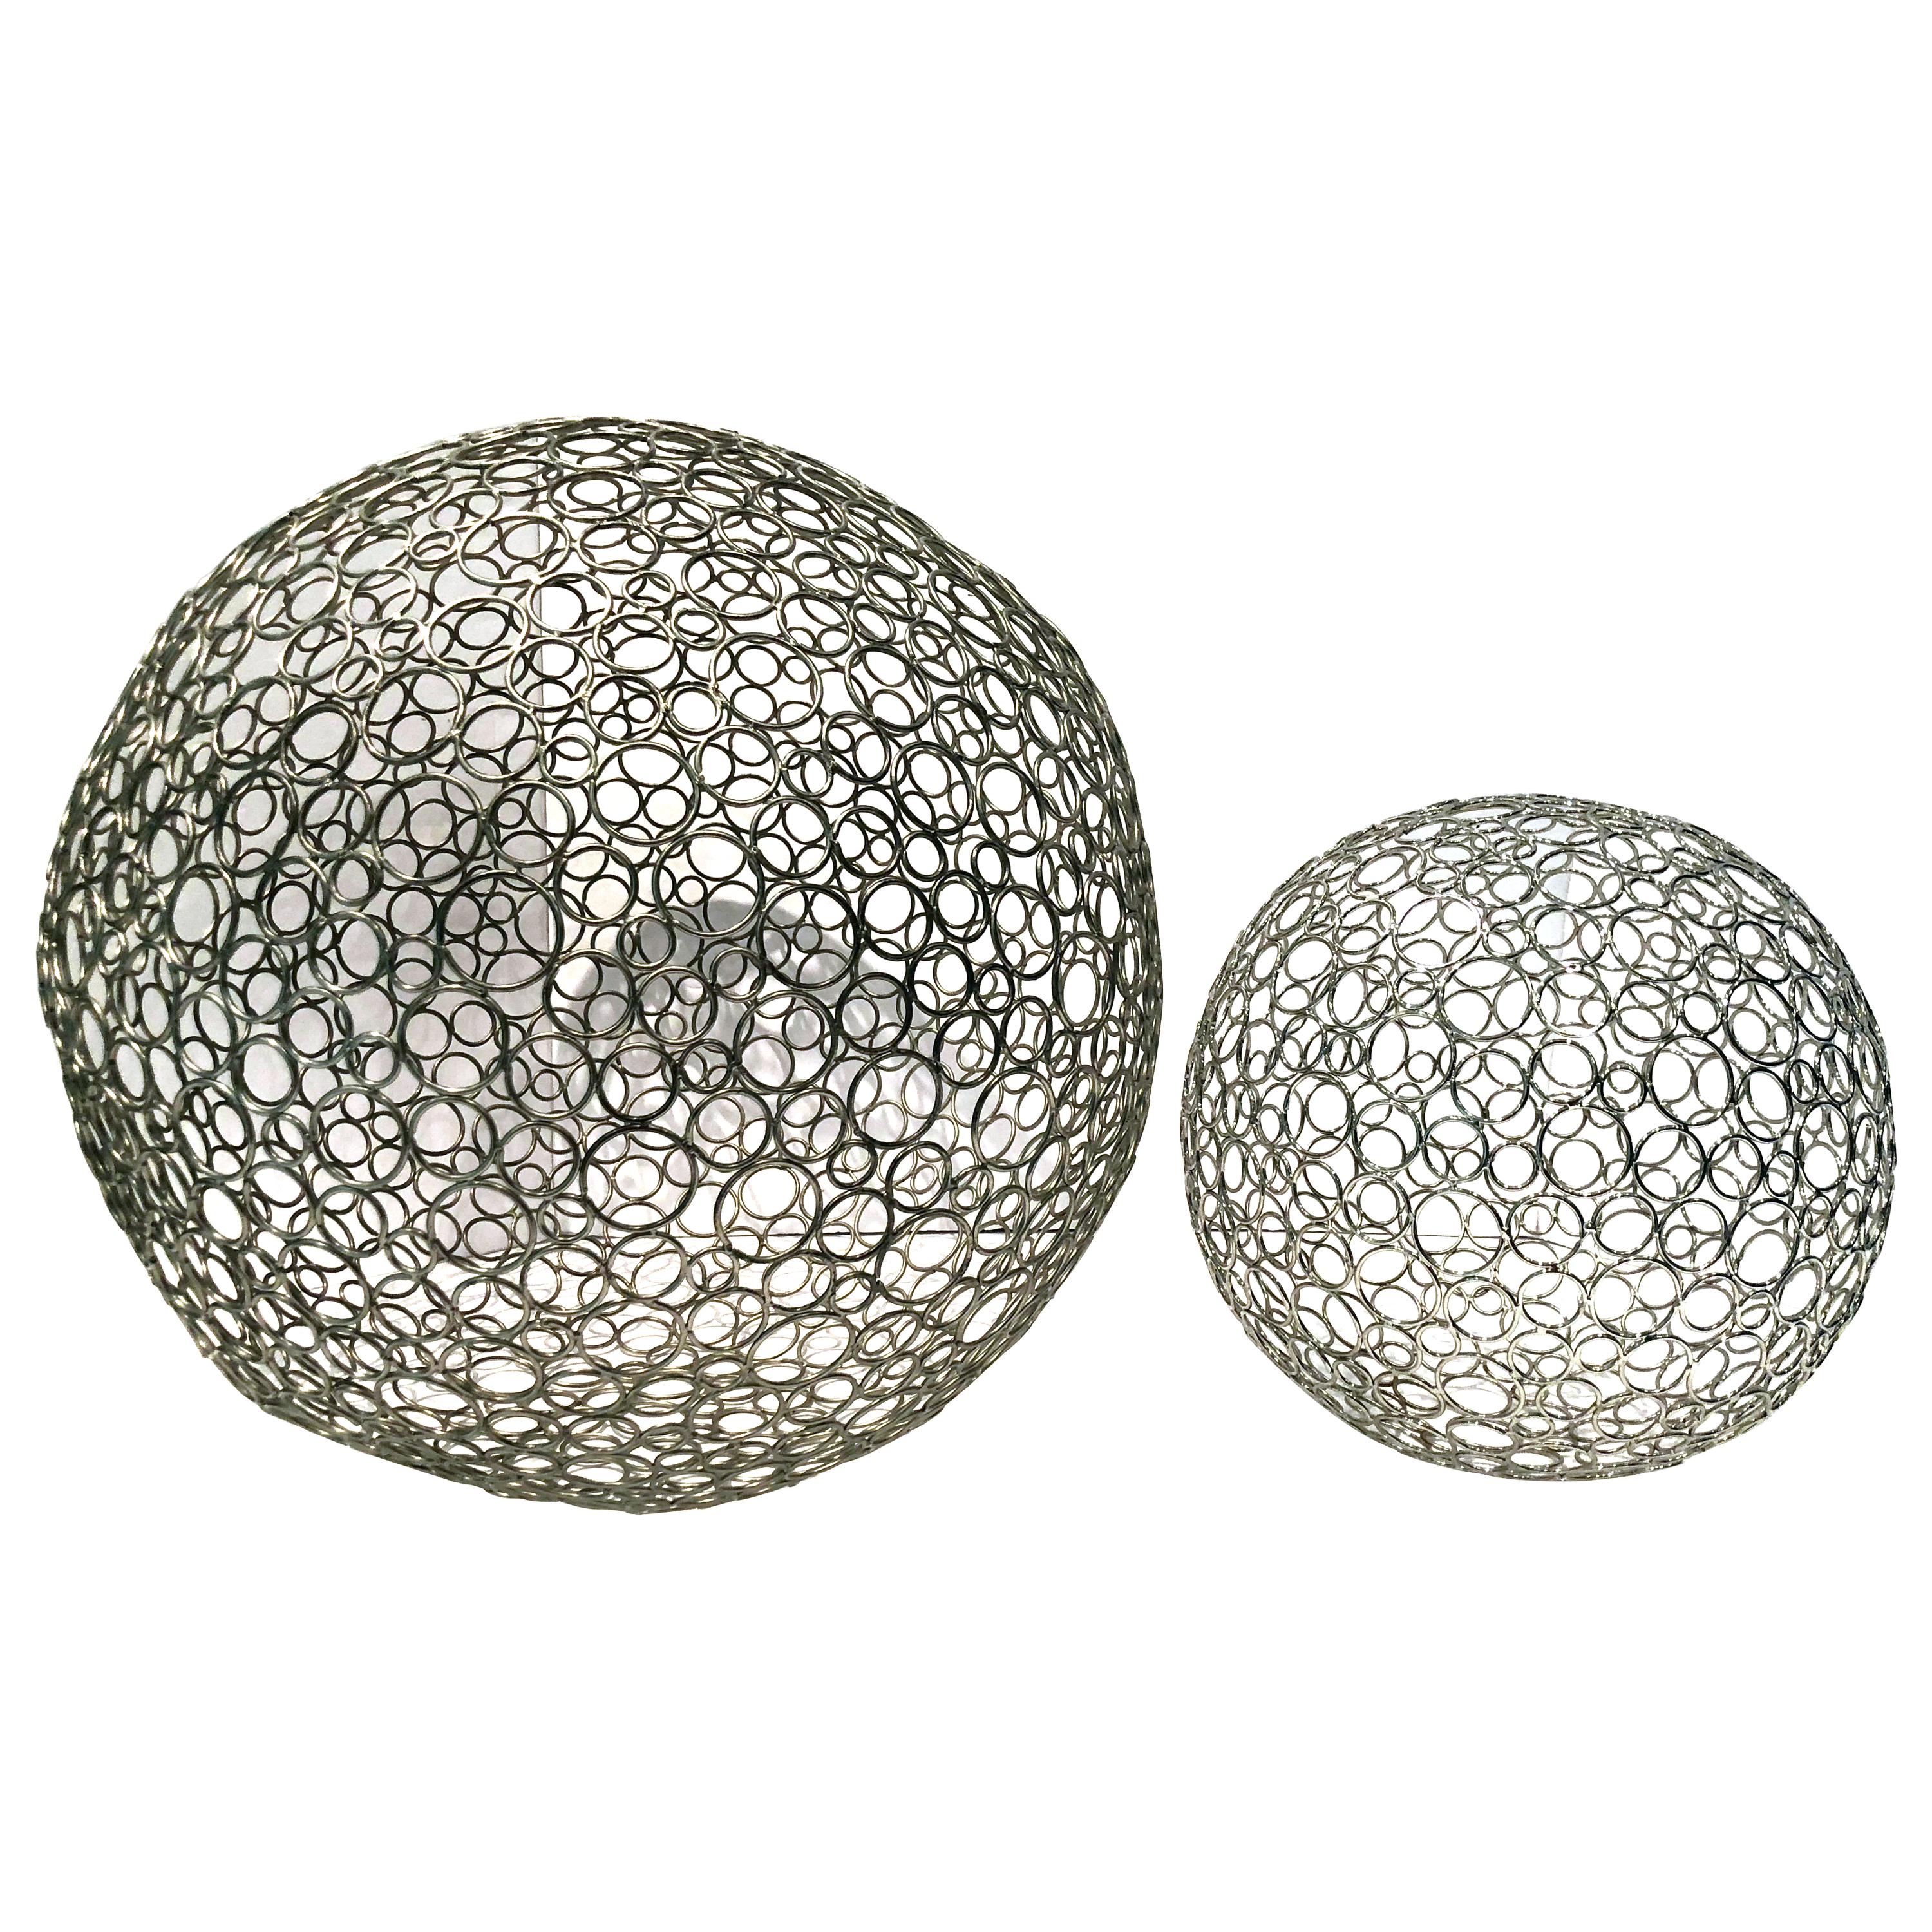 Cool Pair of Artisan Made Wire Sphere Sculptures For Sale